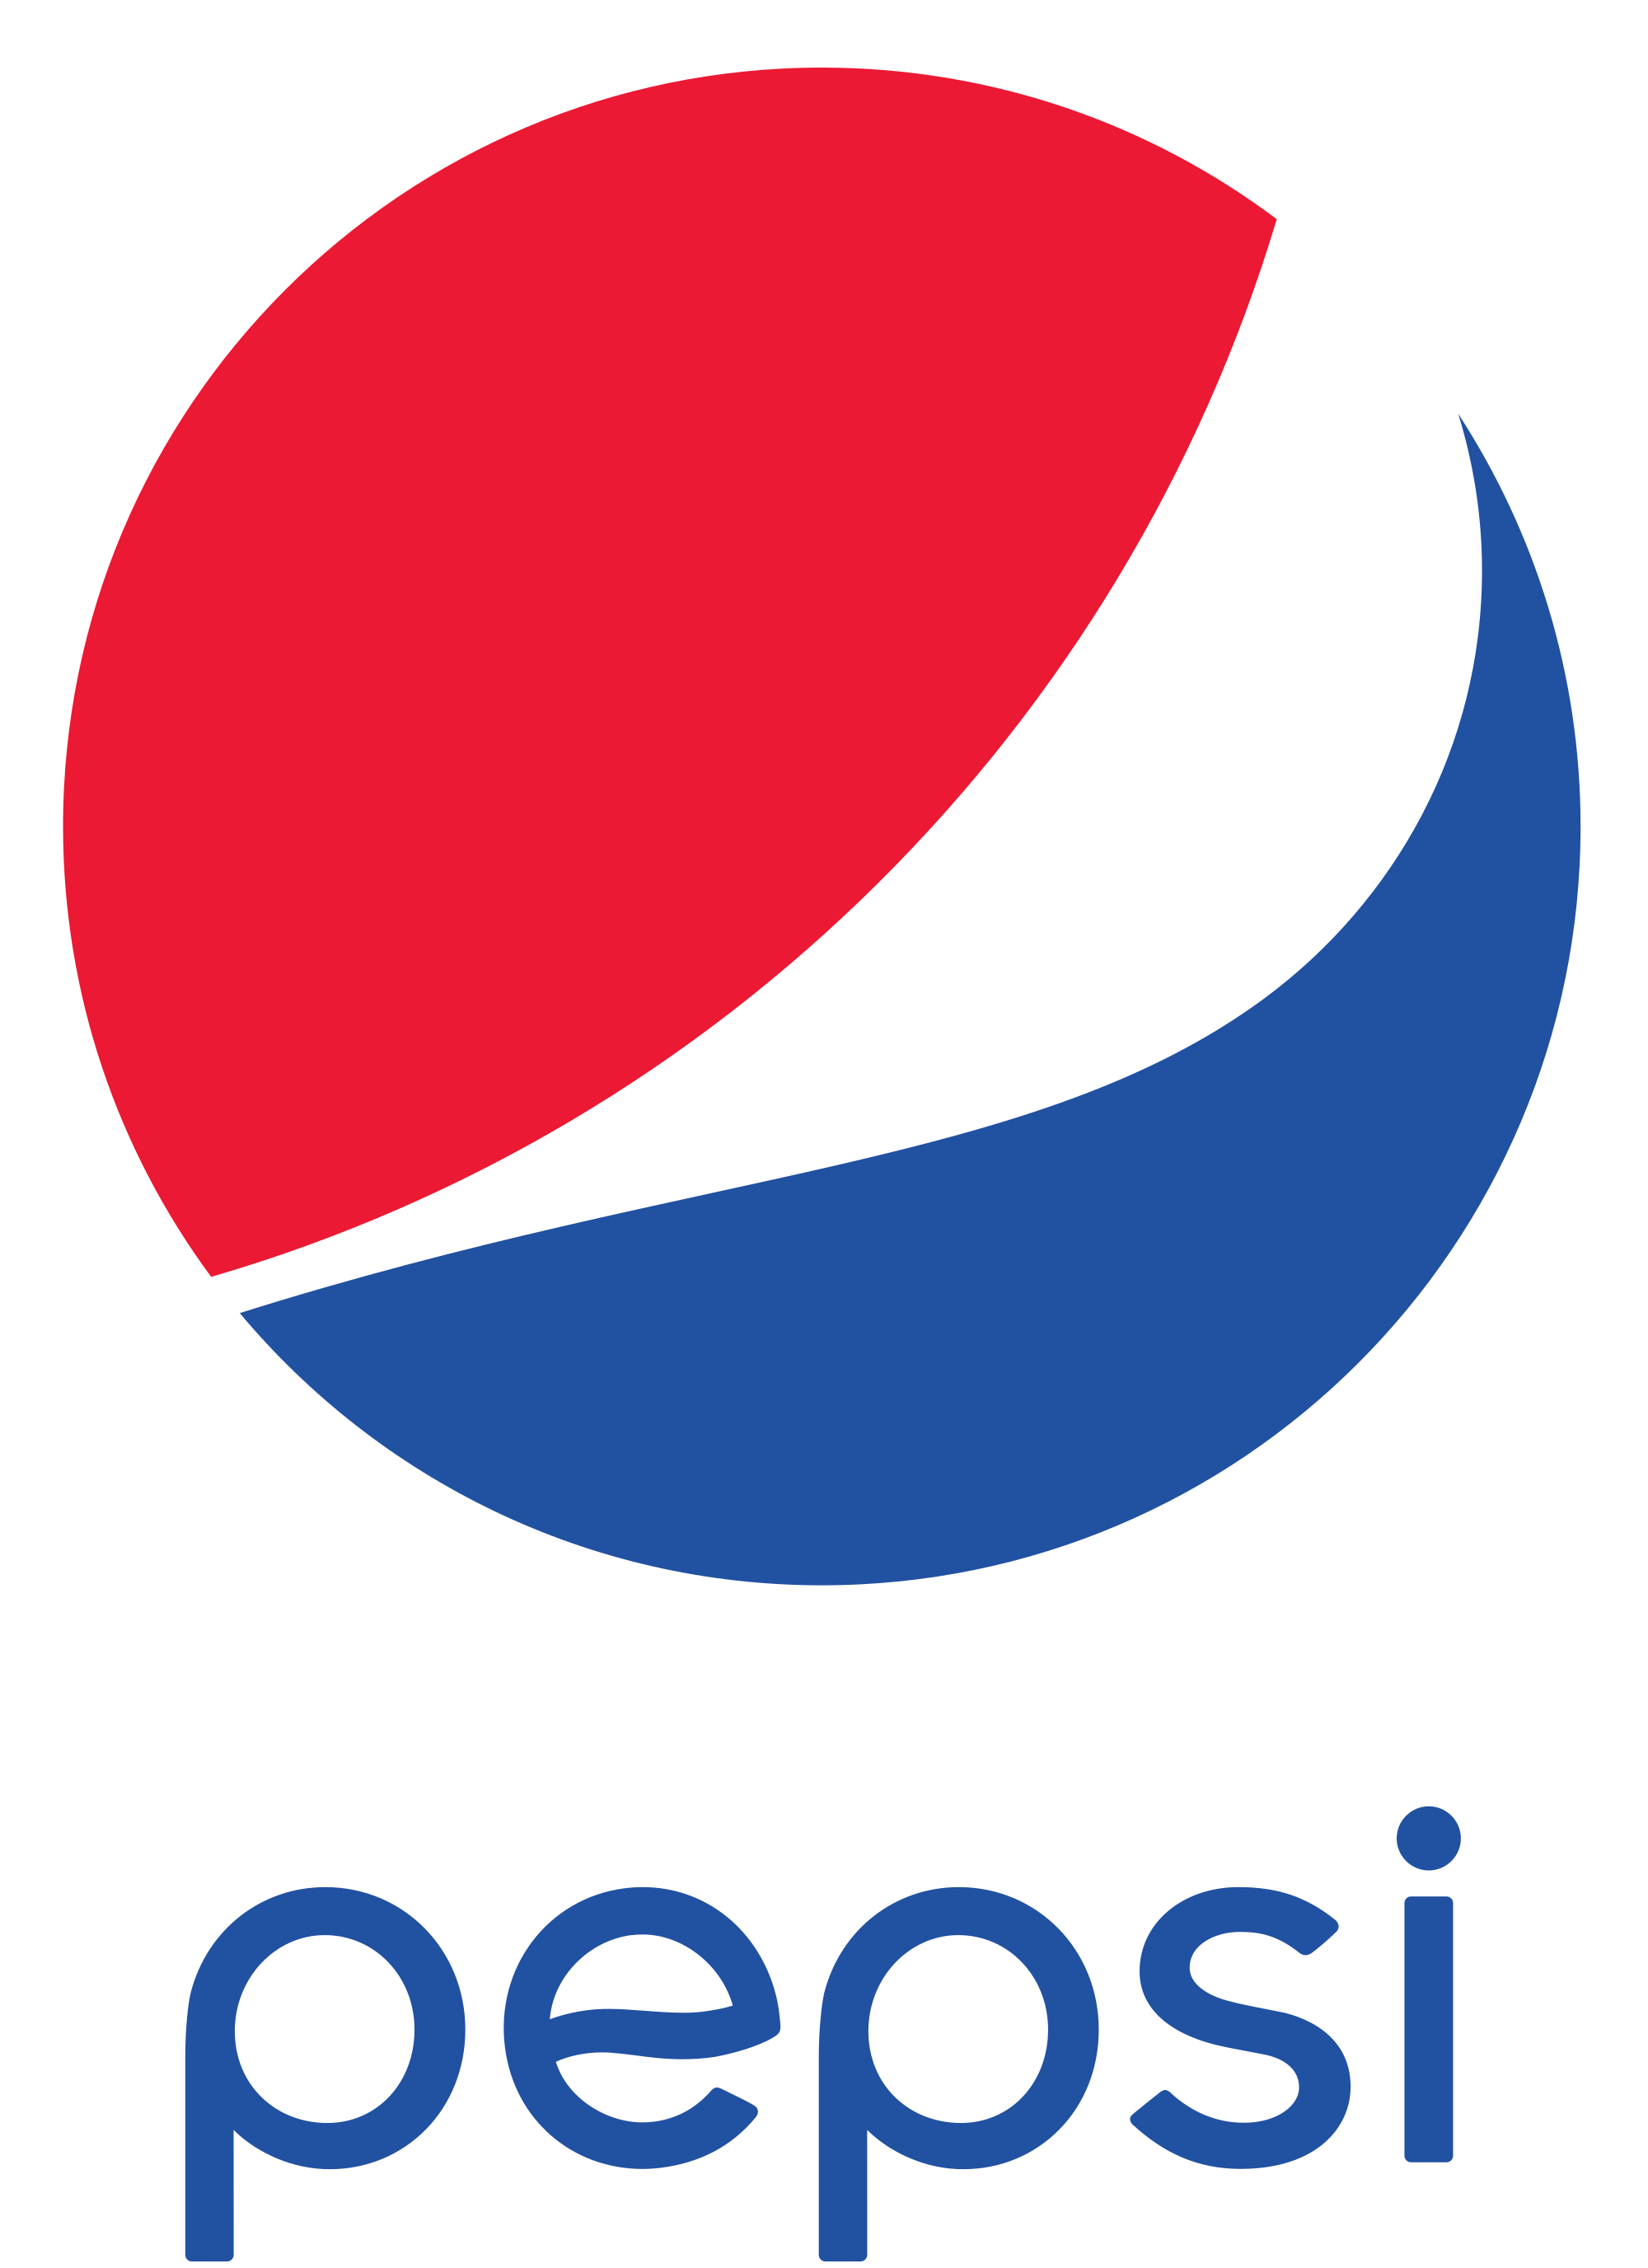 PepsiCo offers soda beverages both fountain and bottled products